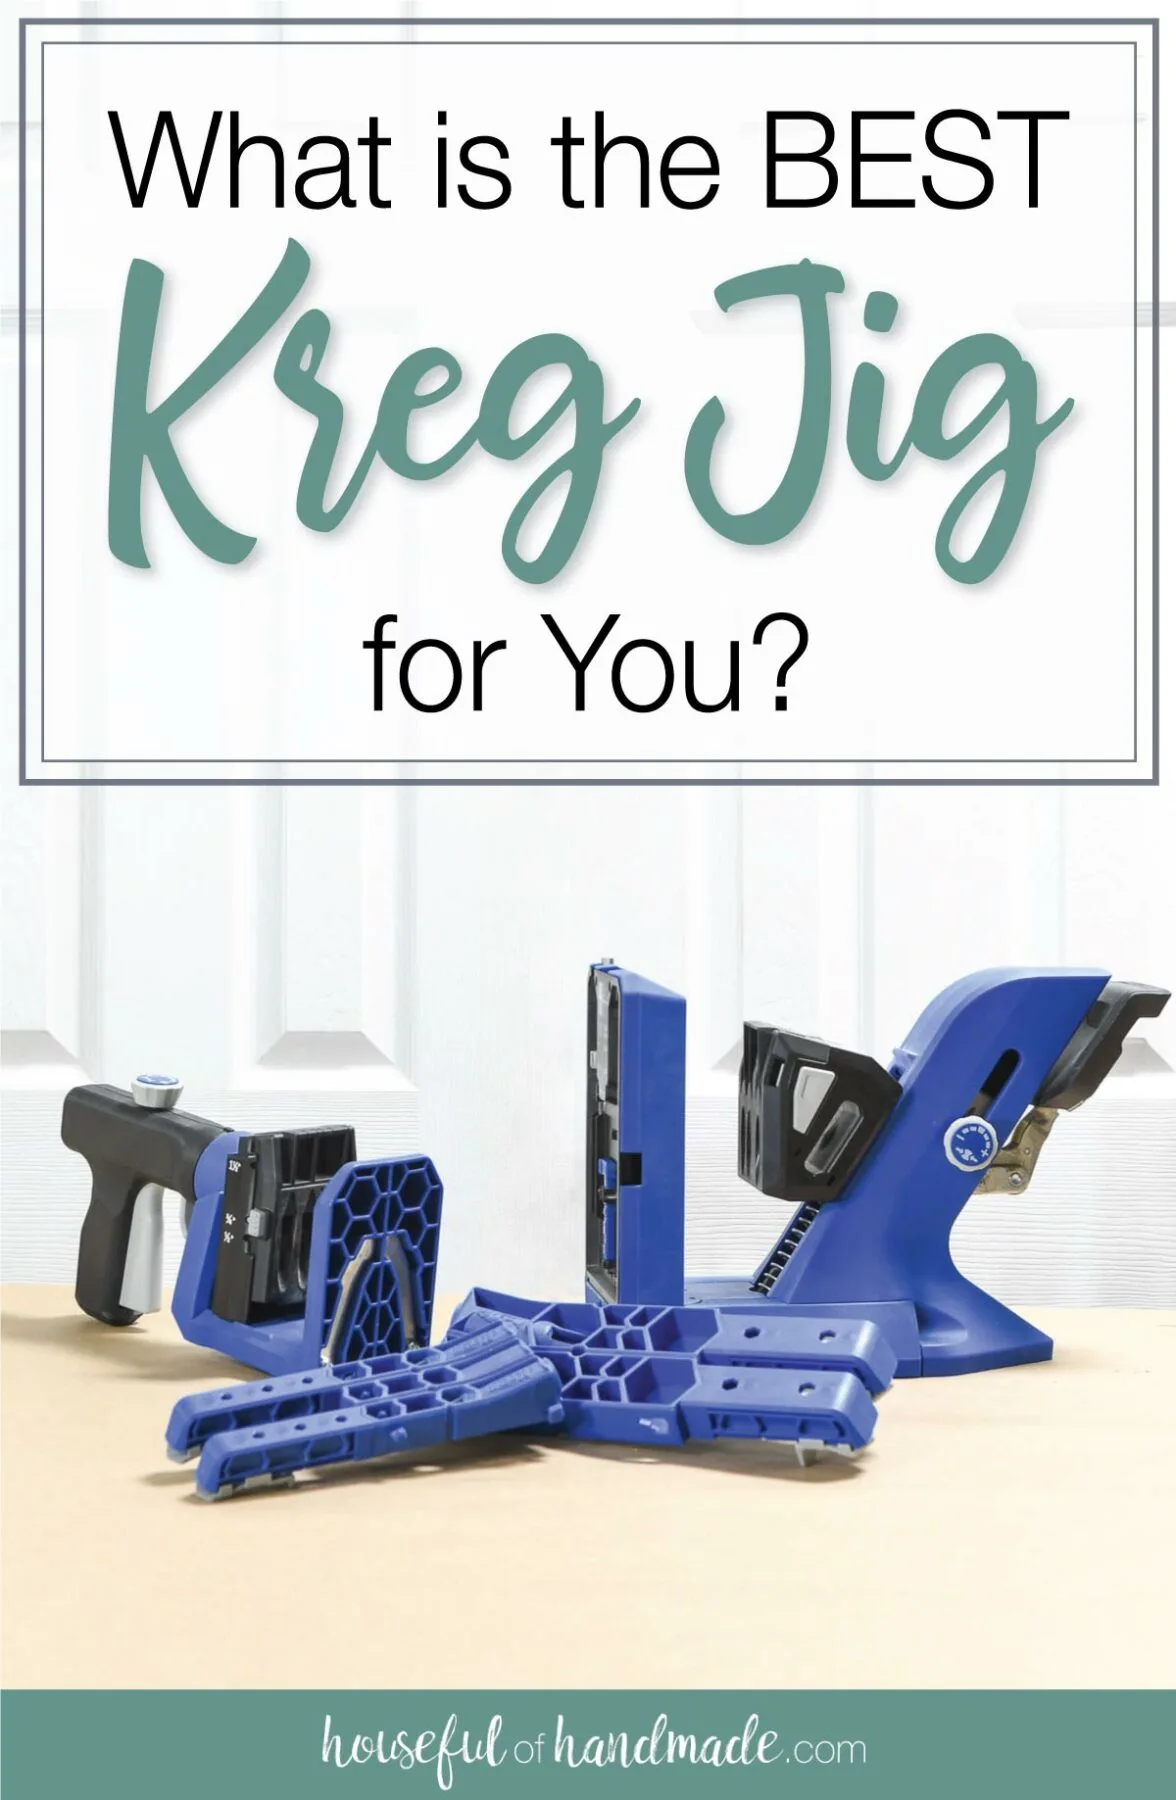 Compare and select your pocket-hole jig, Learn